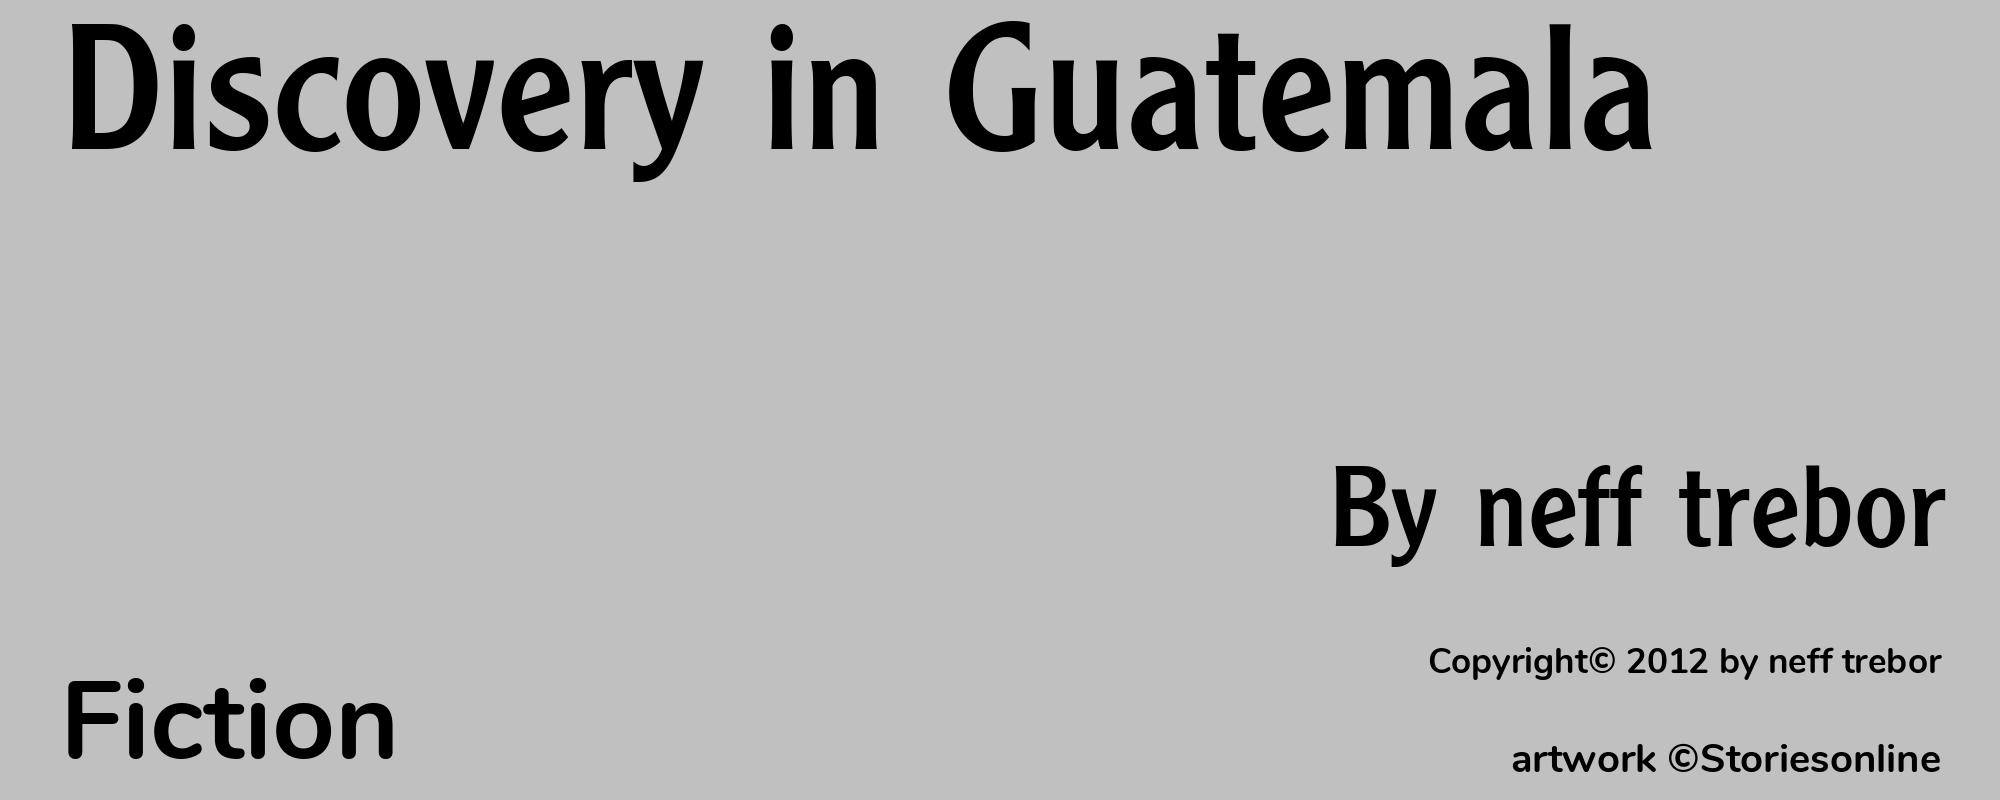 Discovery in Guatemala - Cover